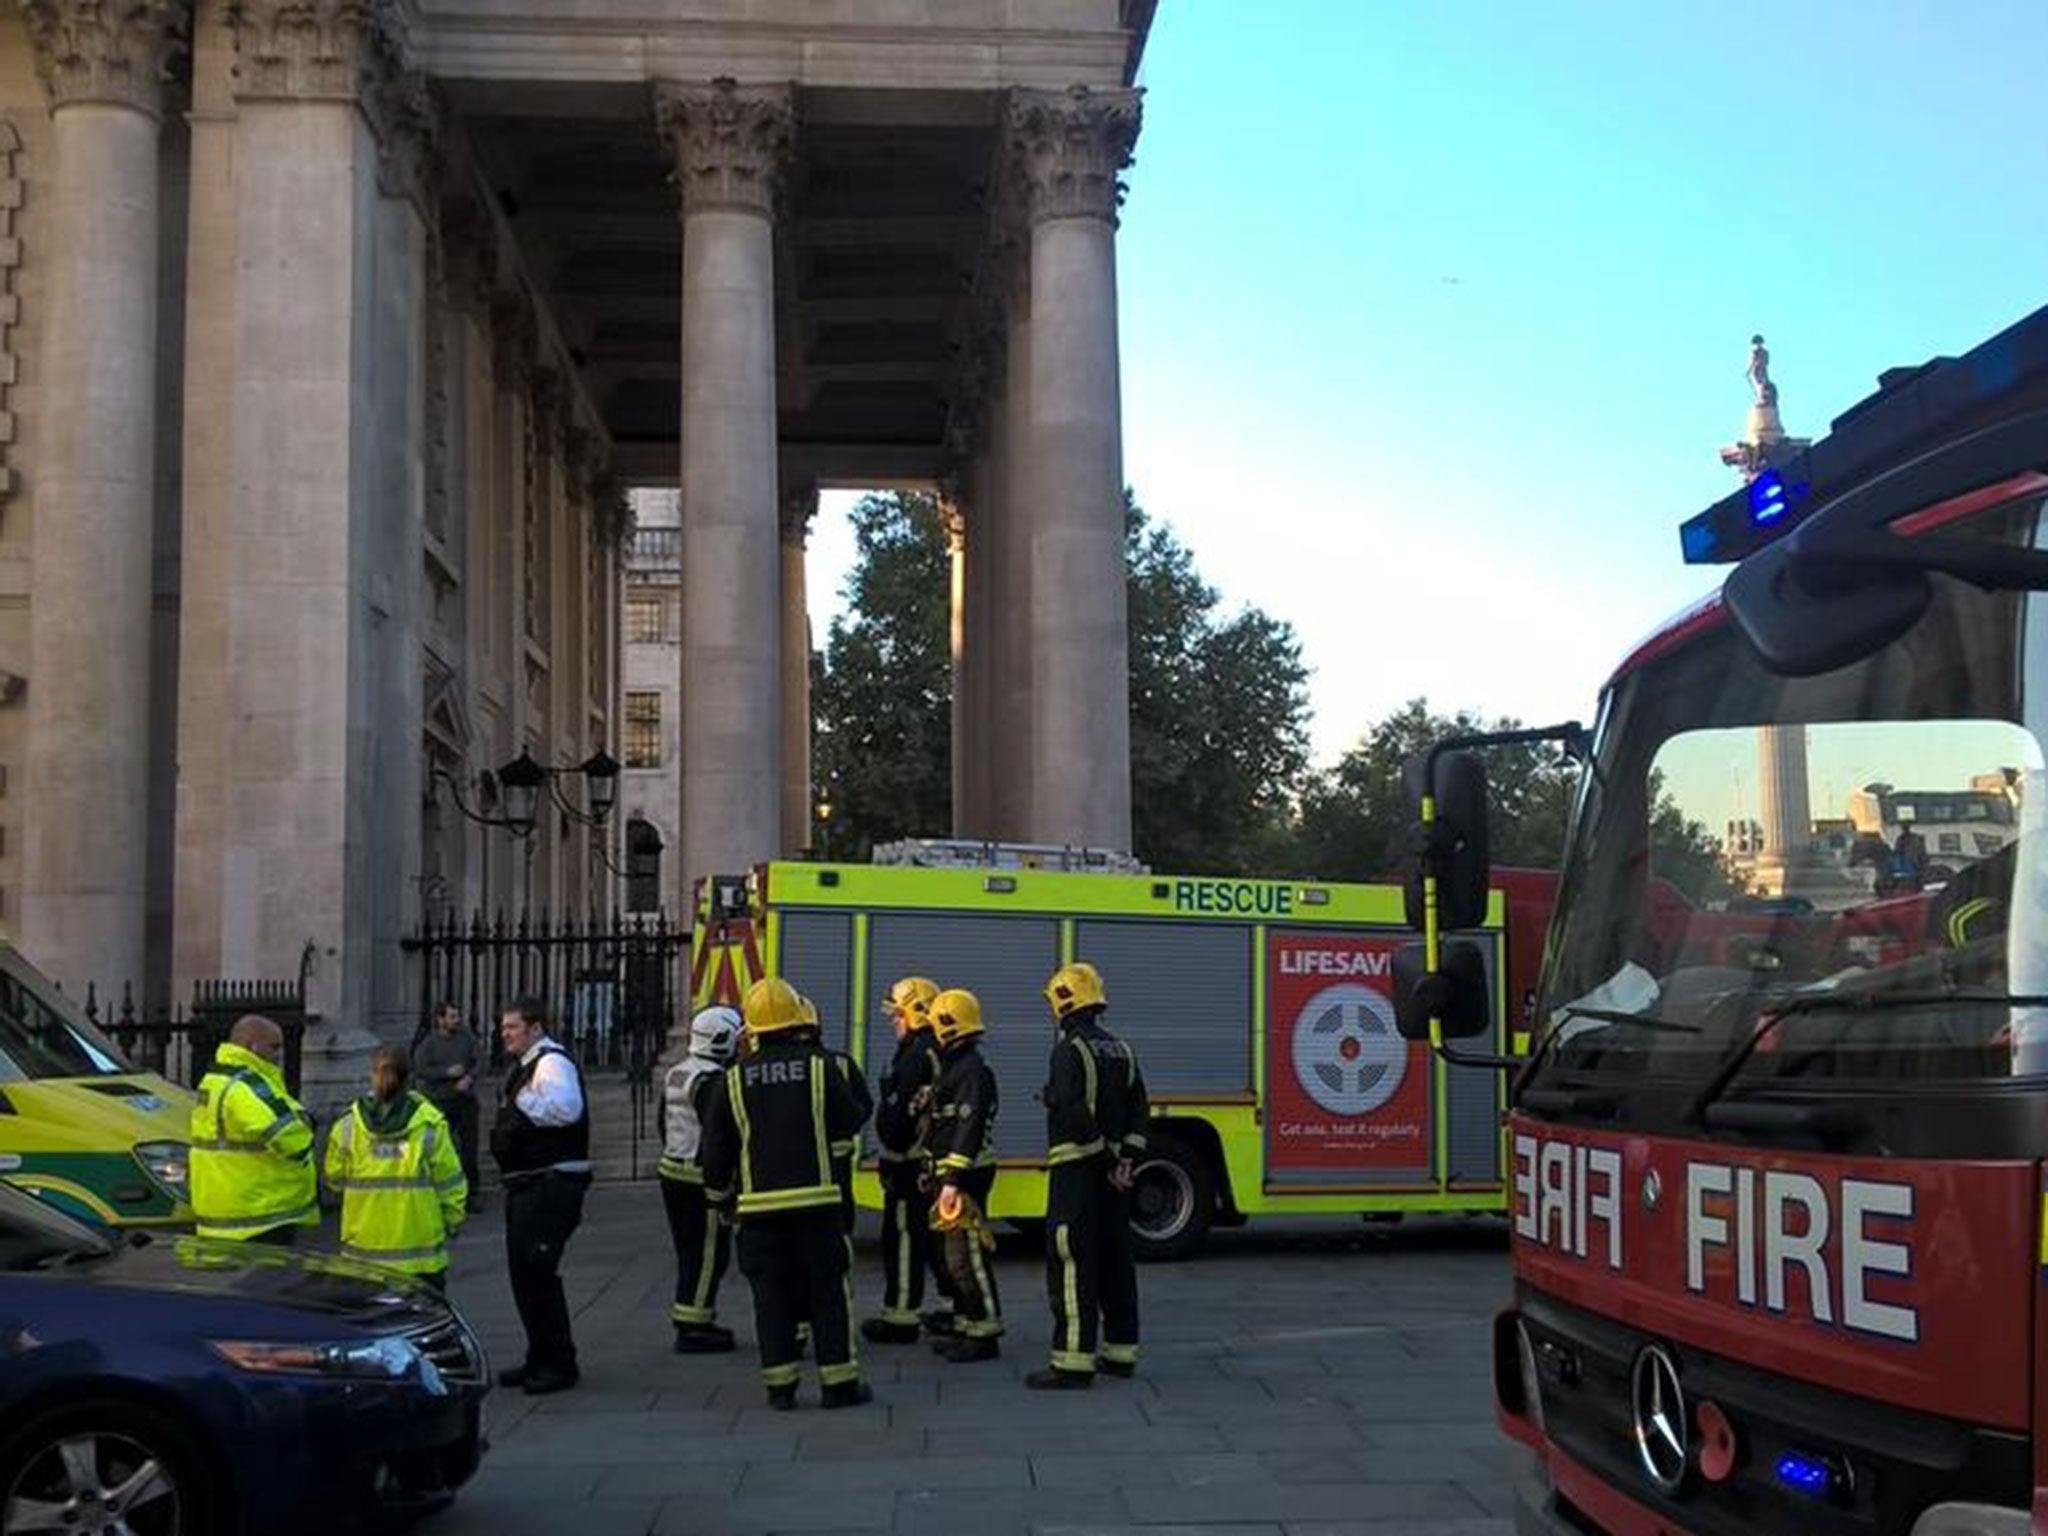 The London Fire Brigade said it was tackling a 'chemical incident' by St Martin-in-the-Fields Church